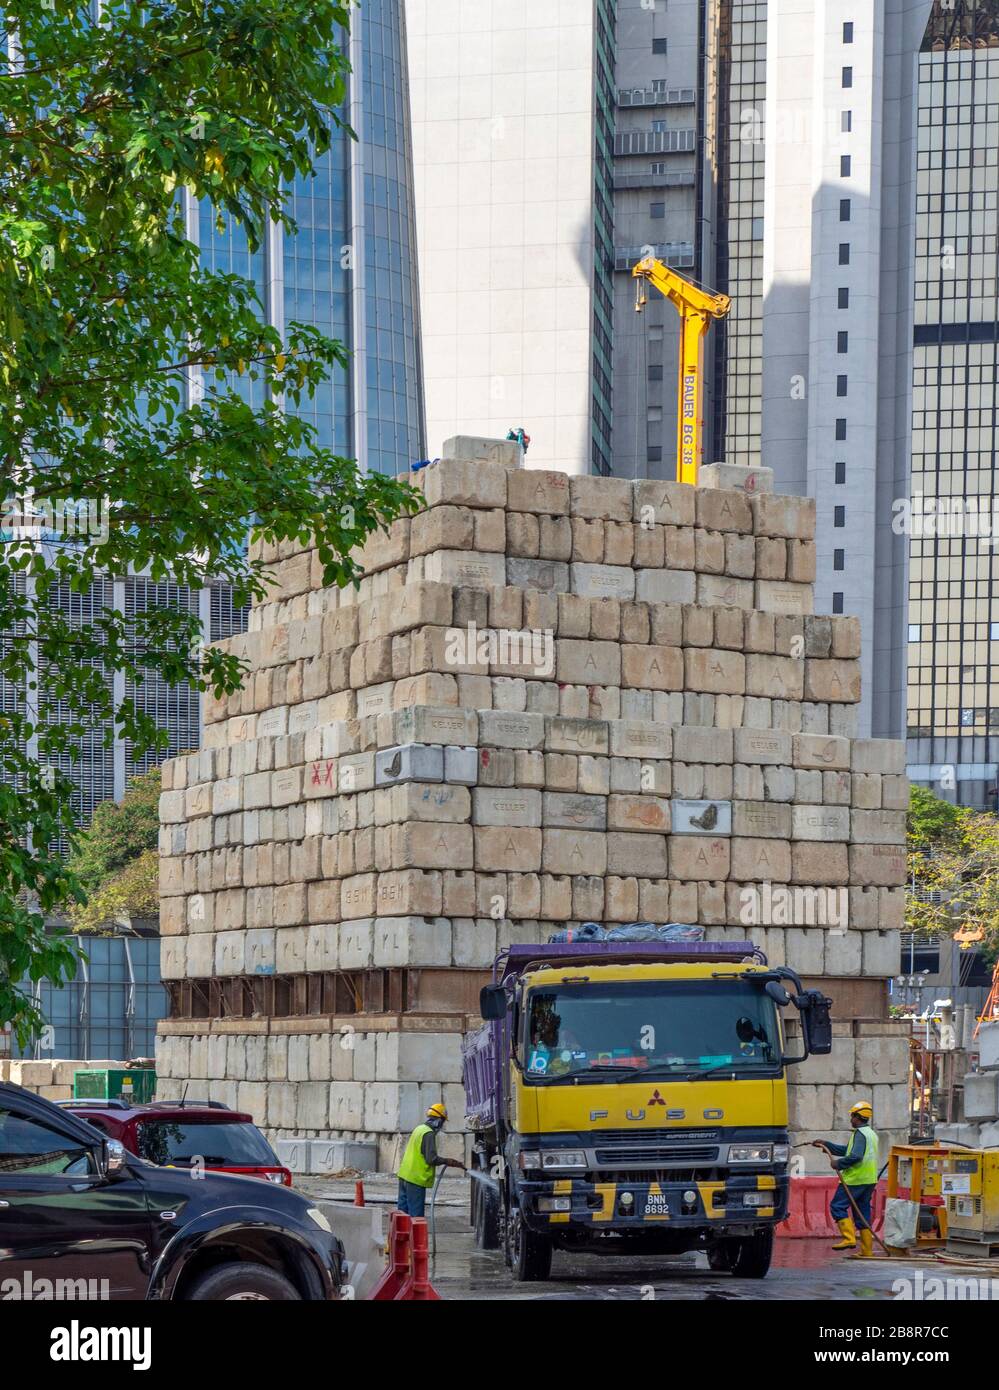 Construction site cement blocks set up as counterweight for a crane, and a truck hosed down by two workmen Kuala Lumpur Malaysia. Stock Photo